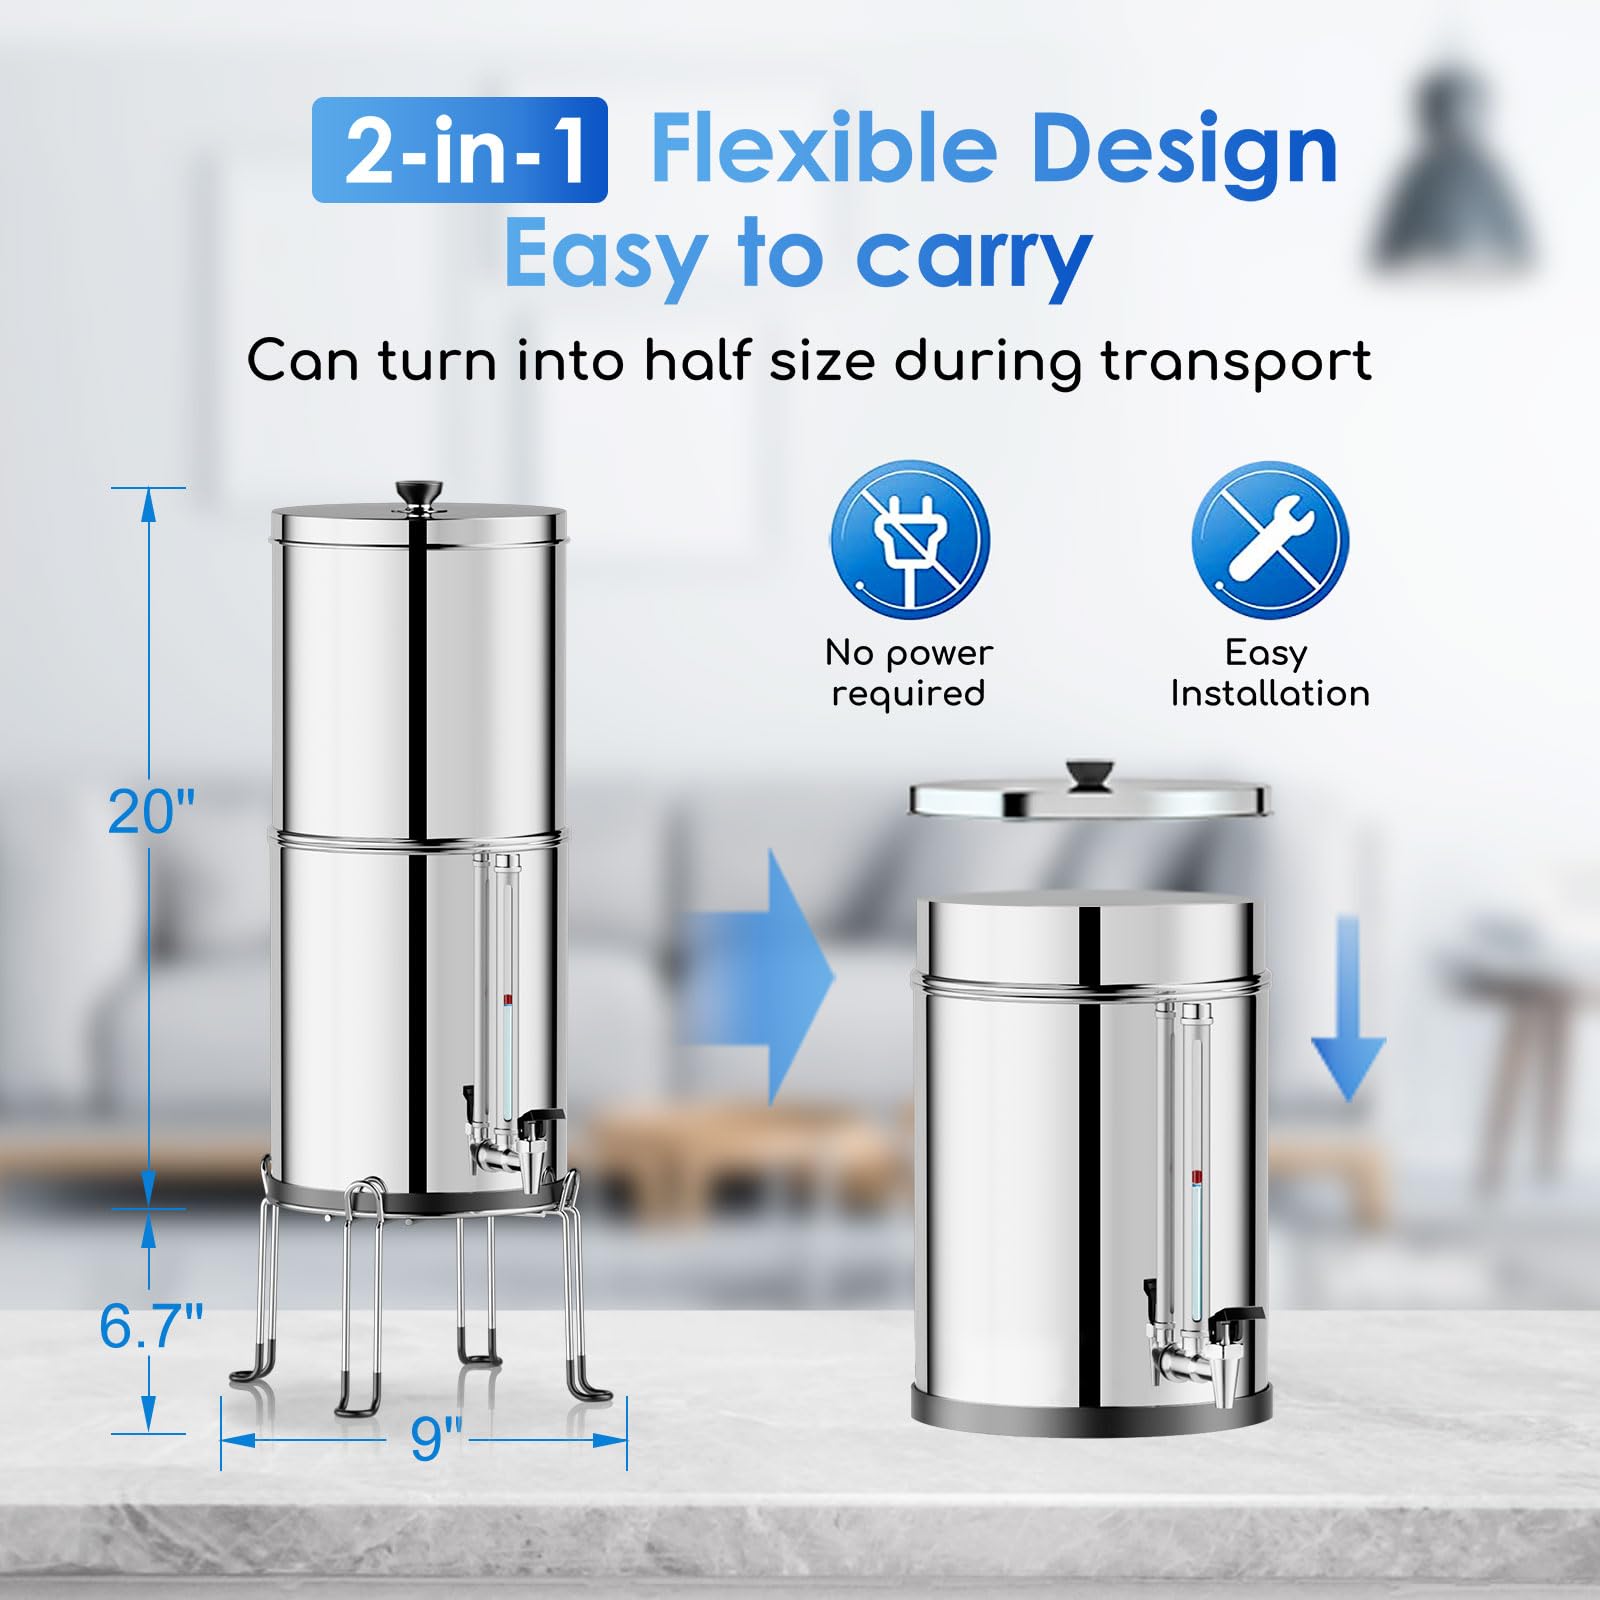 Purewell 8-Stage 0.01μm Ultra-Filtration Water Filter System, 304 Stainless Steel Countertop System with 4 Filters, Metal Water Level Spigot and Stand, Reduce Fluoride and Chlorine, 2.25G, PW-OB-CF